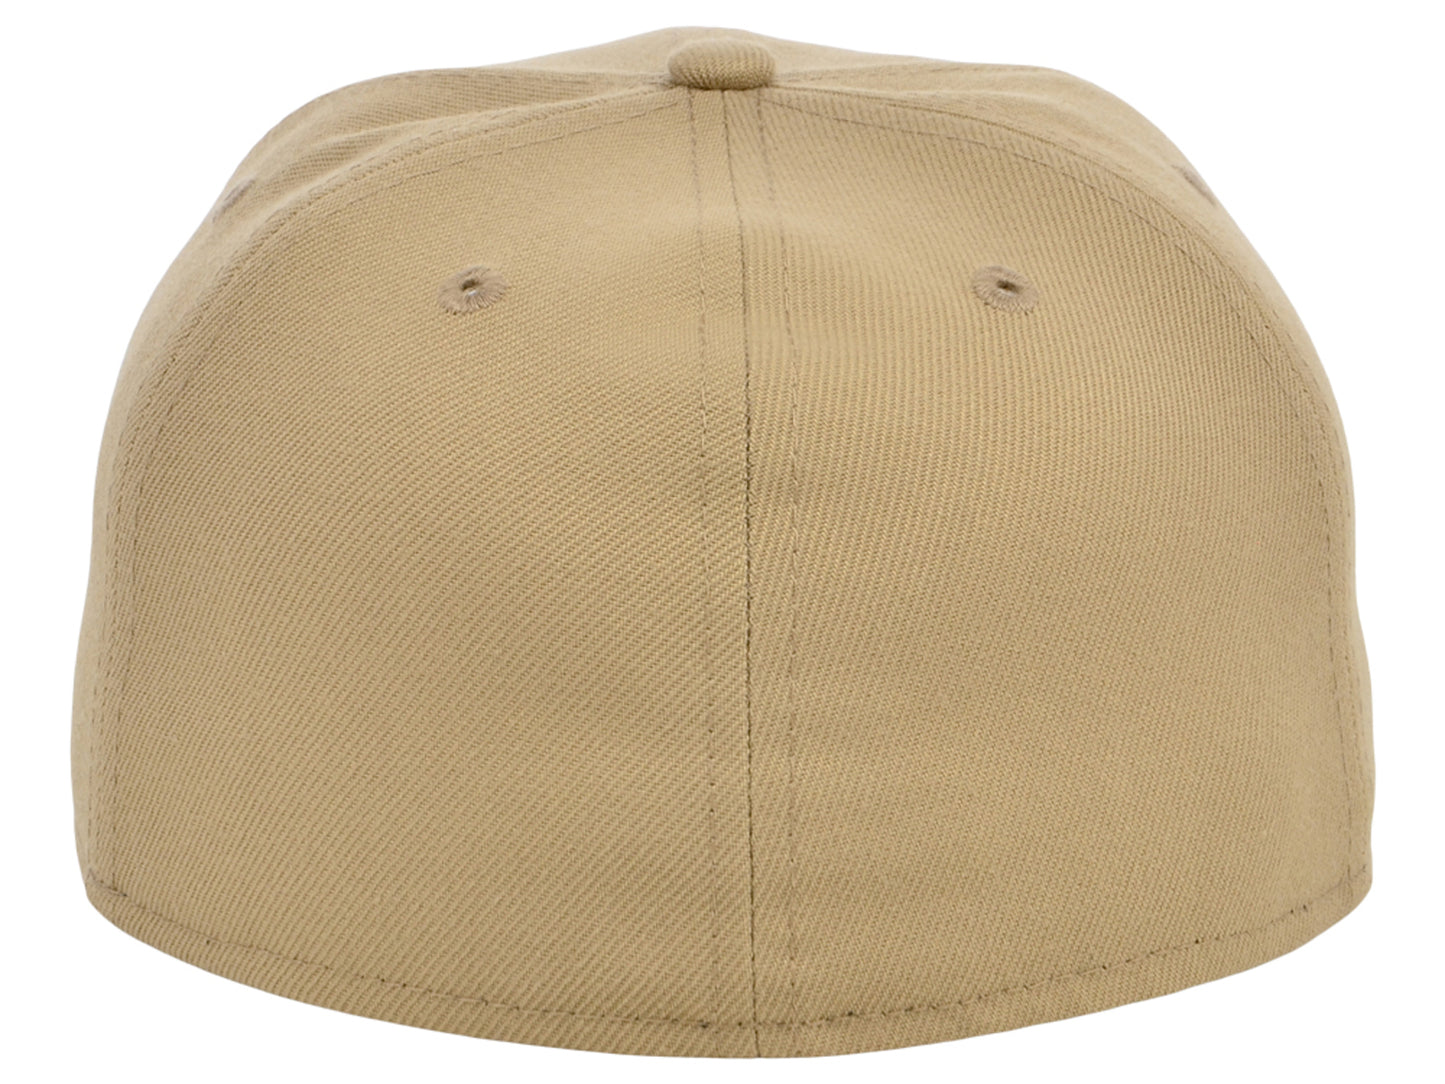 Crowns By Lids Full Court Fitted UV Cap - Khaki/Green